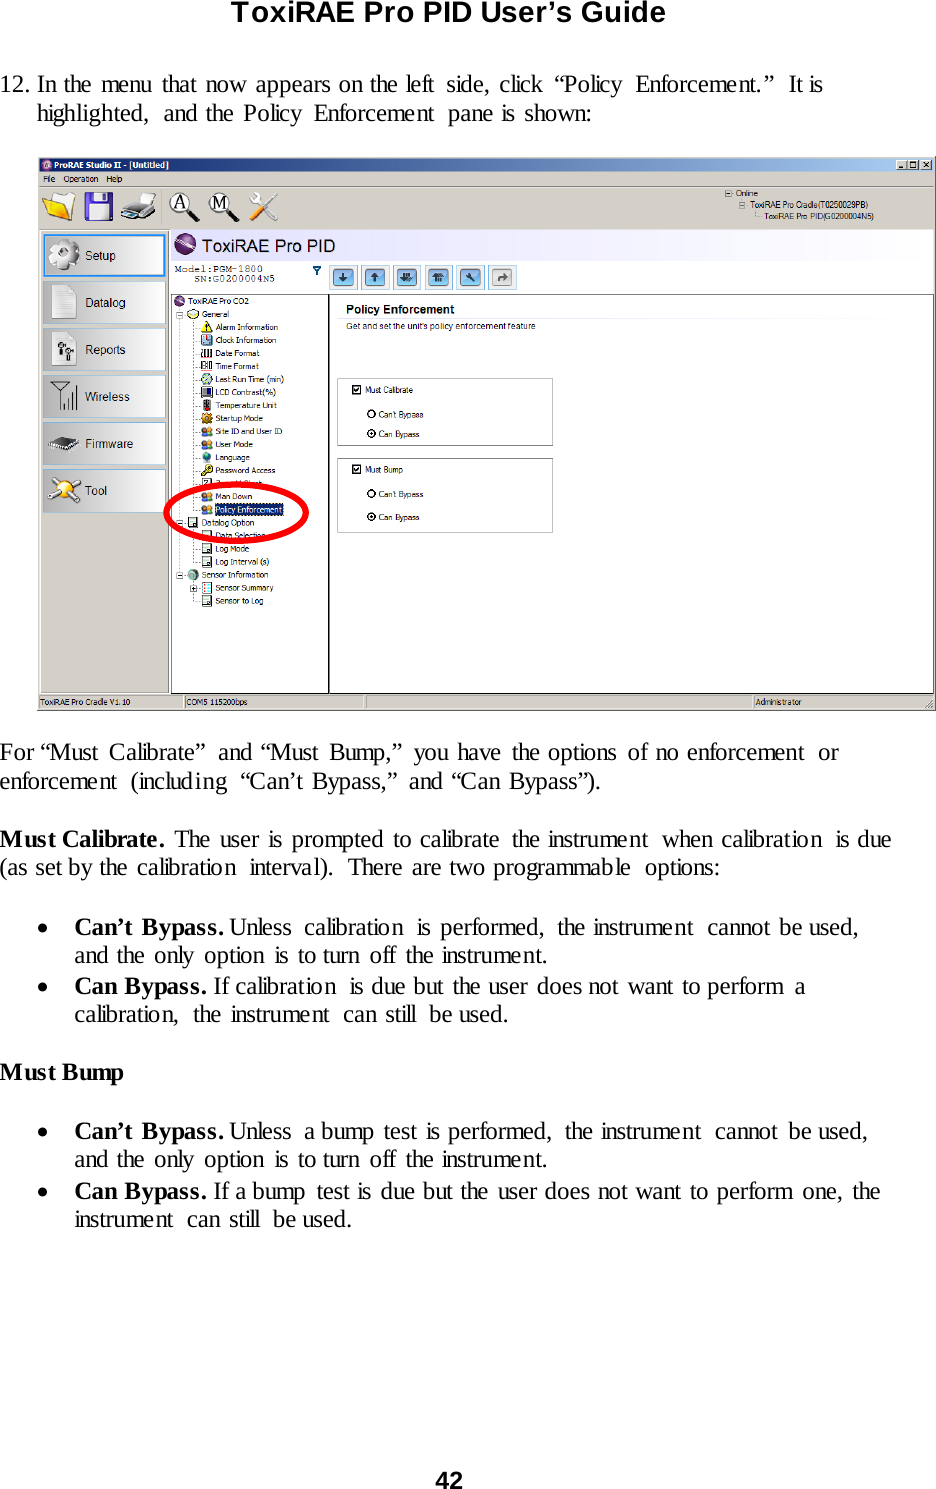 ToxiRAE Pro PID User’s Guide  42   12. In the menu that now appears on the left  side, click “Policy  Enforcement.”  It is highlighted,  and the Policy  Enforcement  pane is shown:    For “Must Calibrate” and “Must Bump,” you have the options of no enforcement  or enforcement  (including  “Can’t Bypass,” and “Can Bypass”).  Must Calibrate. The user is prompted to calibrate the instrument  when calibration  is due (as set by the calibration  interval).  There are two programmable  options:  • Can’t Bypass. Unless calibration  is performed, the instrument  cannot be used, and the only option is to turn off the instrument. • Can Bypass. If calibration  is due but the user does not want to perform  a calibratio n, the instrume nt can still be used.  Must Bump  • Can’t Bypass. Unless  a bump test is performed,  the instrument  cannot  be used, and the only option is to turn off the instrument. • Can Bypass. If a bump test is due but the user does not want to perform one, the instrument can still be used.  